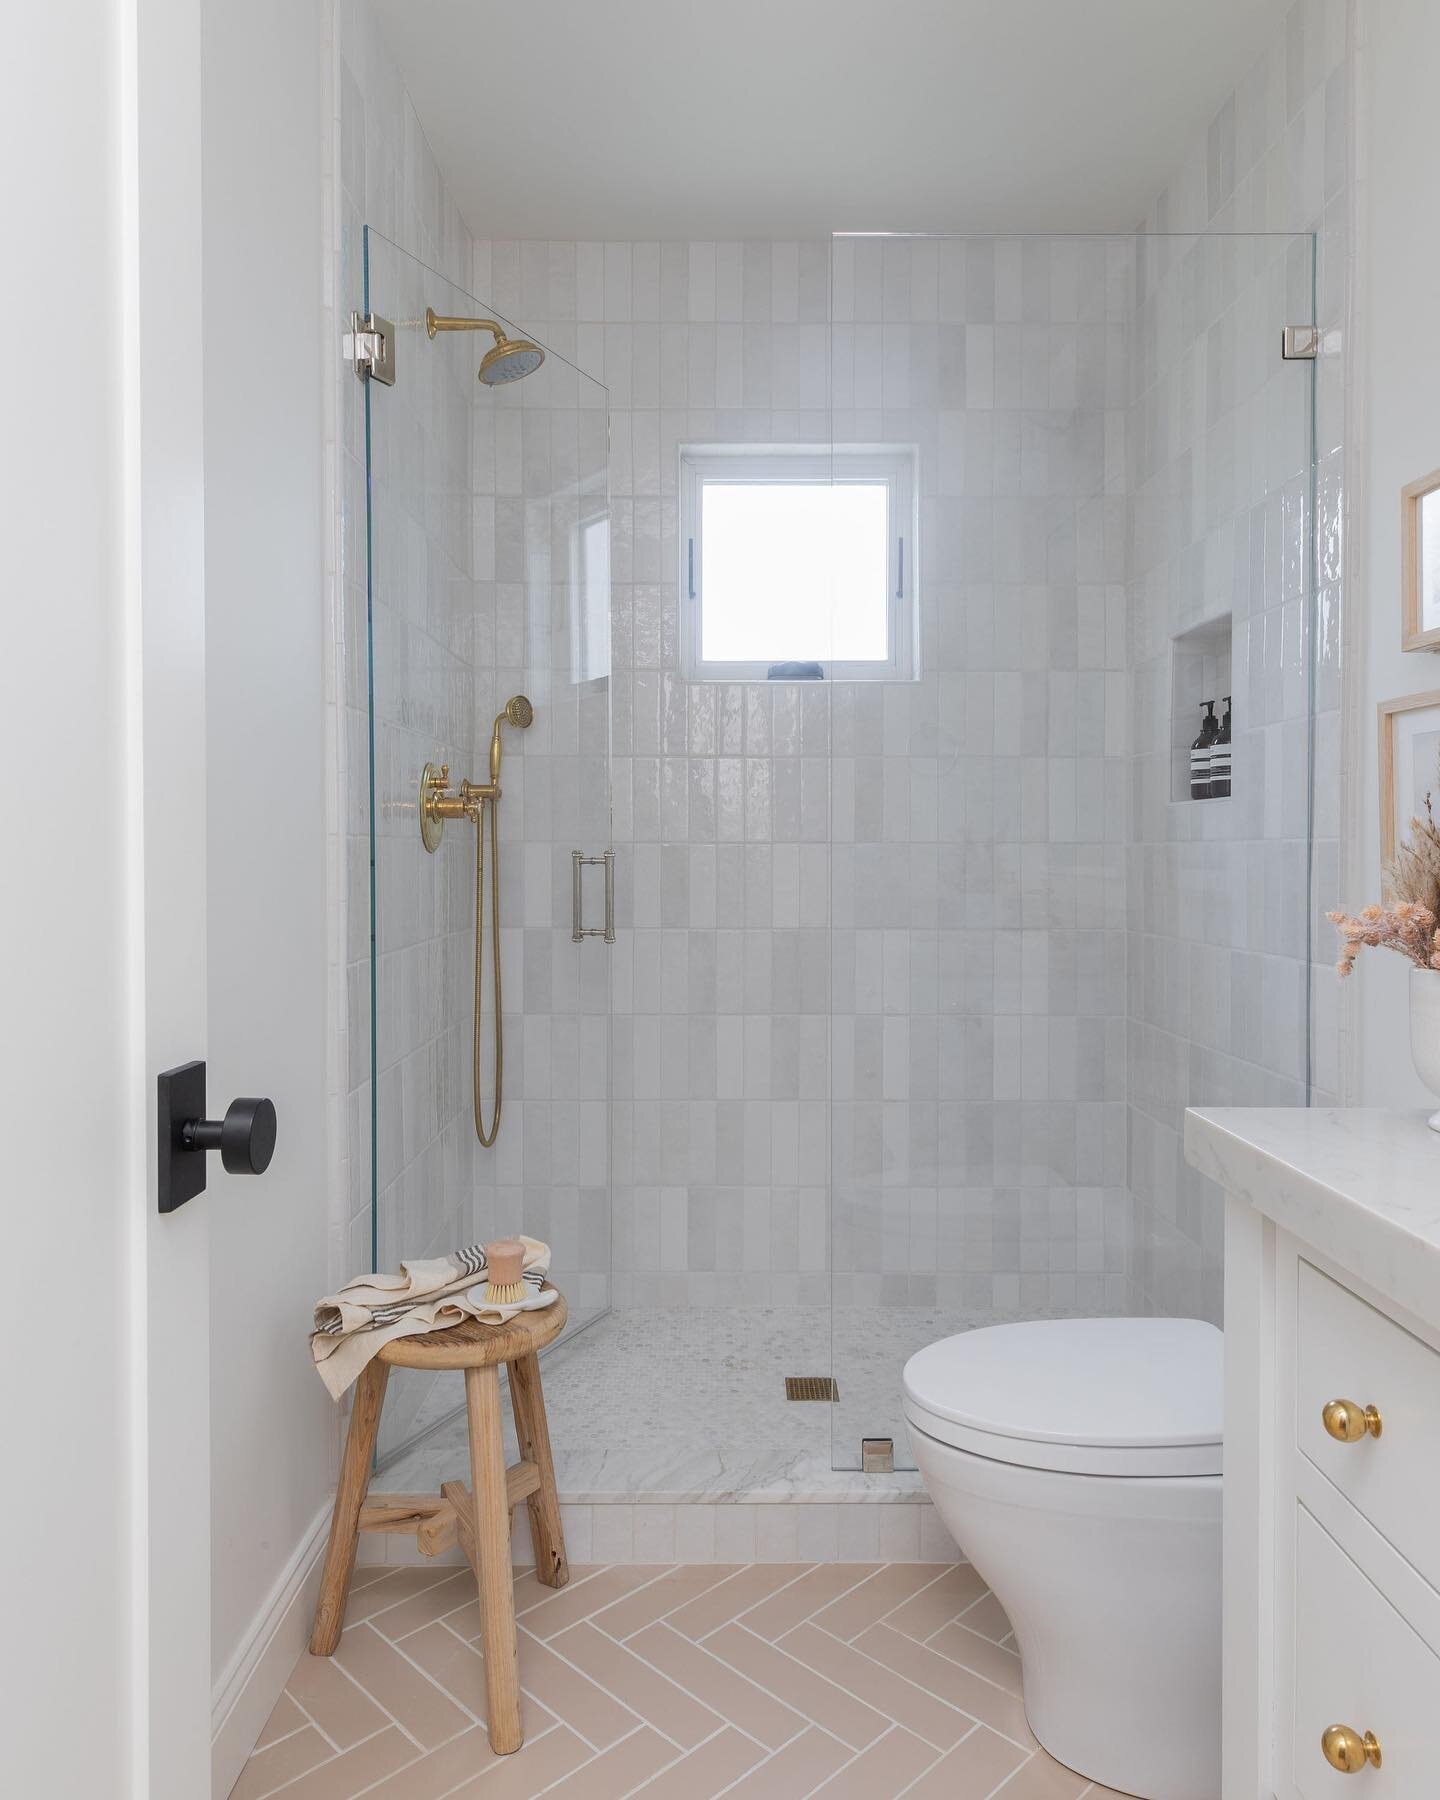 Updating your guest bathroom is a subtle way to make your guests feel right at home. This guest bathroom from our #surreyfarms project welcomes guests with thoughtful design.

Design: @ling.interiors 
📸: @nicolediannephoto 

#bathroomdesign #interio